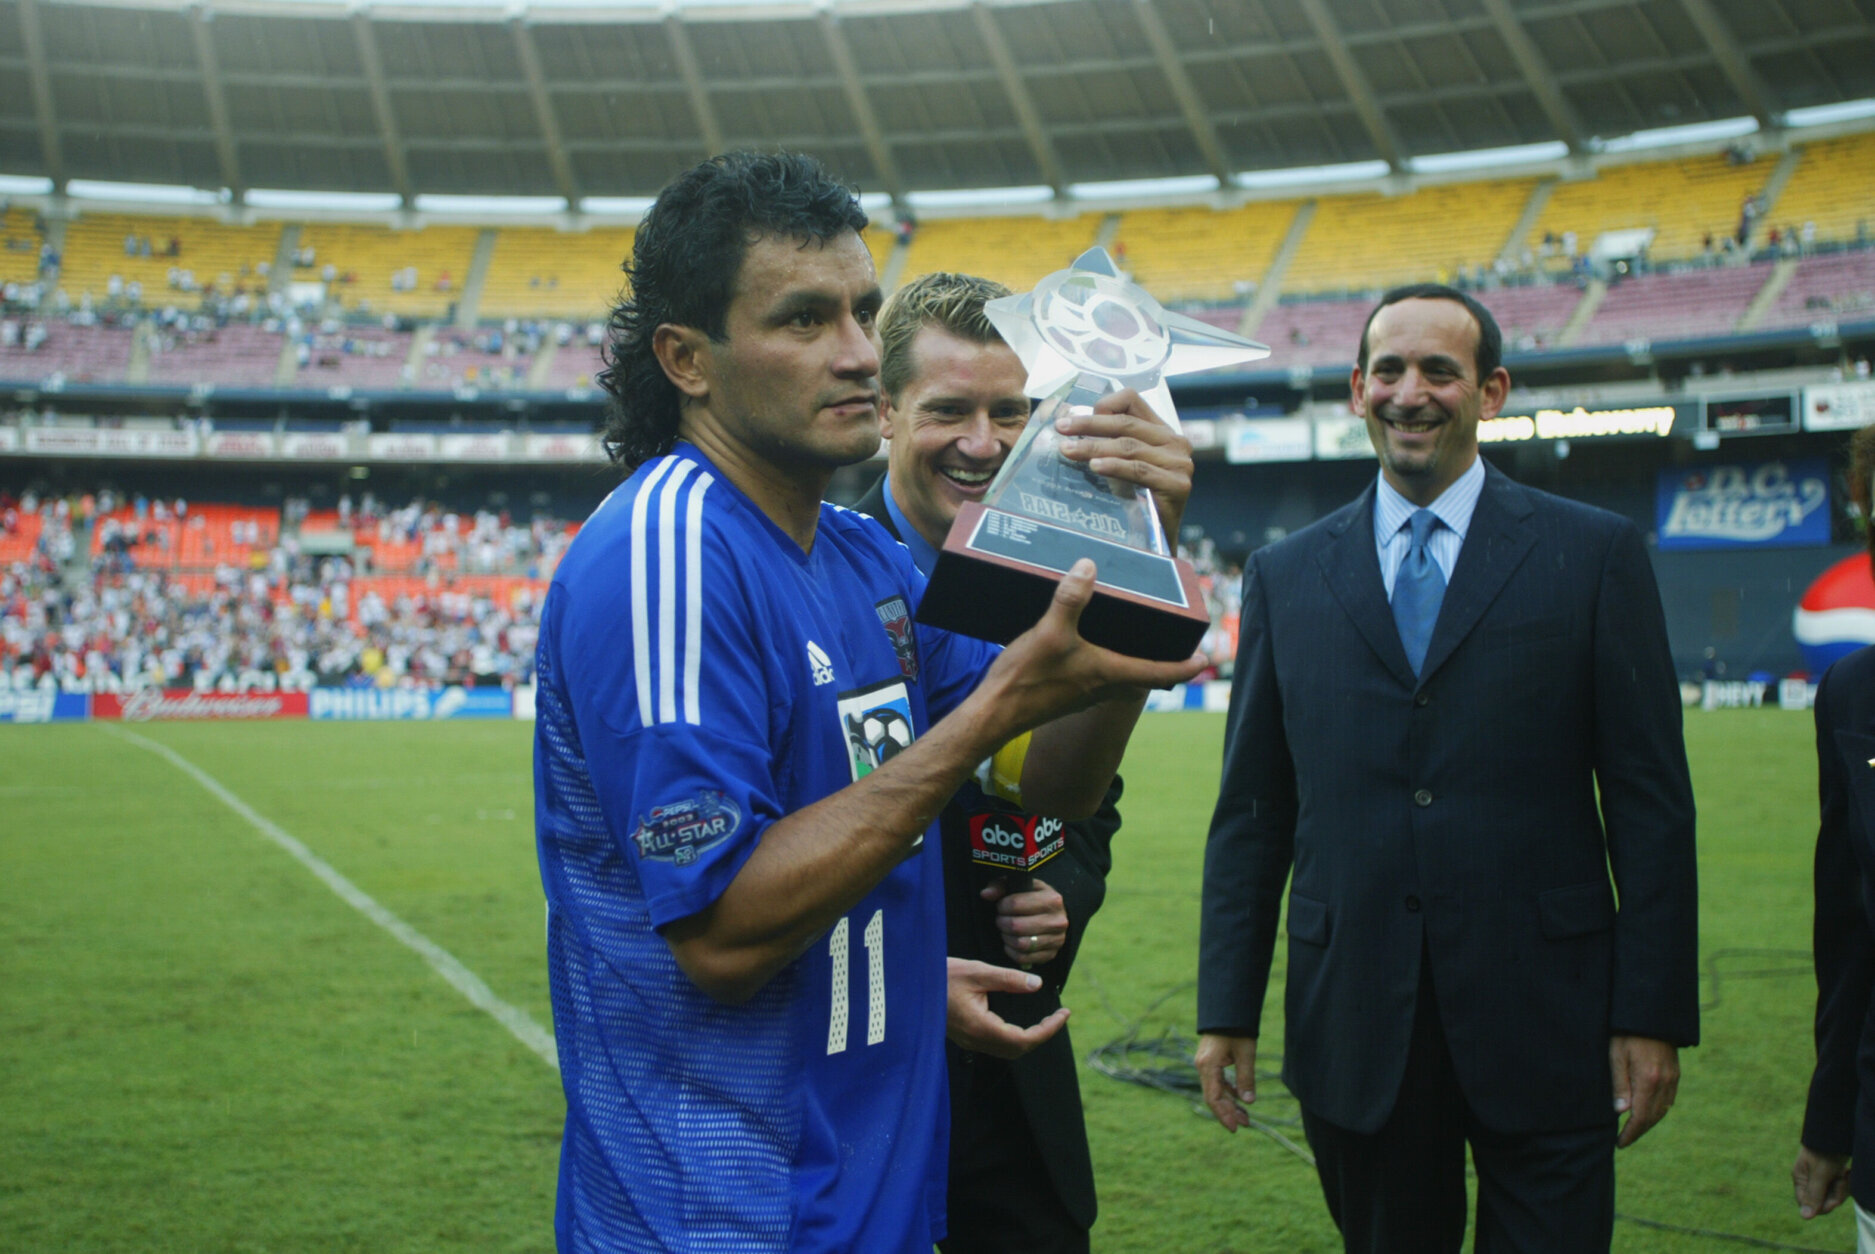 WASHINGTON - AUGUST 3:  Midfielder Marco Etcheverry #11 of the MLS All Stars holds the MVP trophy after the MLS All Star match against the US National Team on August 3, 2002 at RFK Stadium in Washington, D.C.  The MLS All Stars defeated the US National Team 3-2.  (Photo by Jamie Squire/Getty Images)